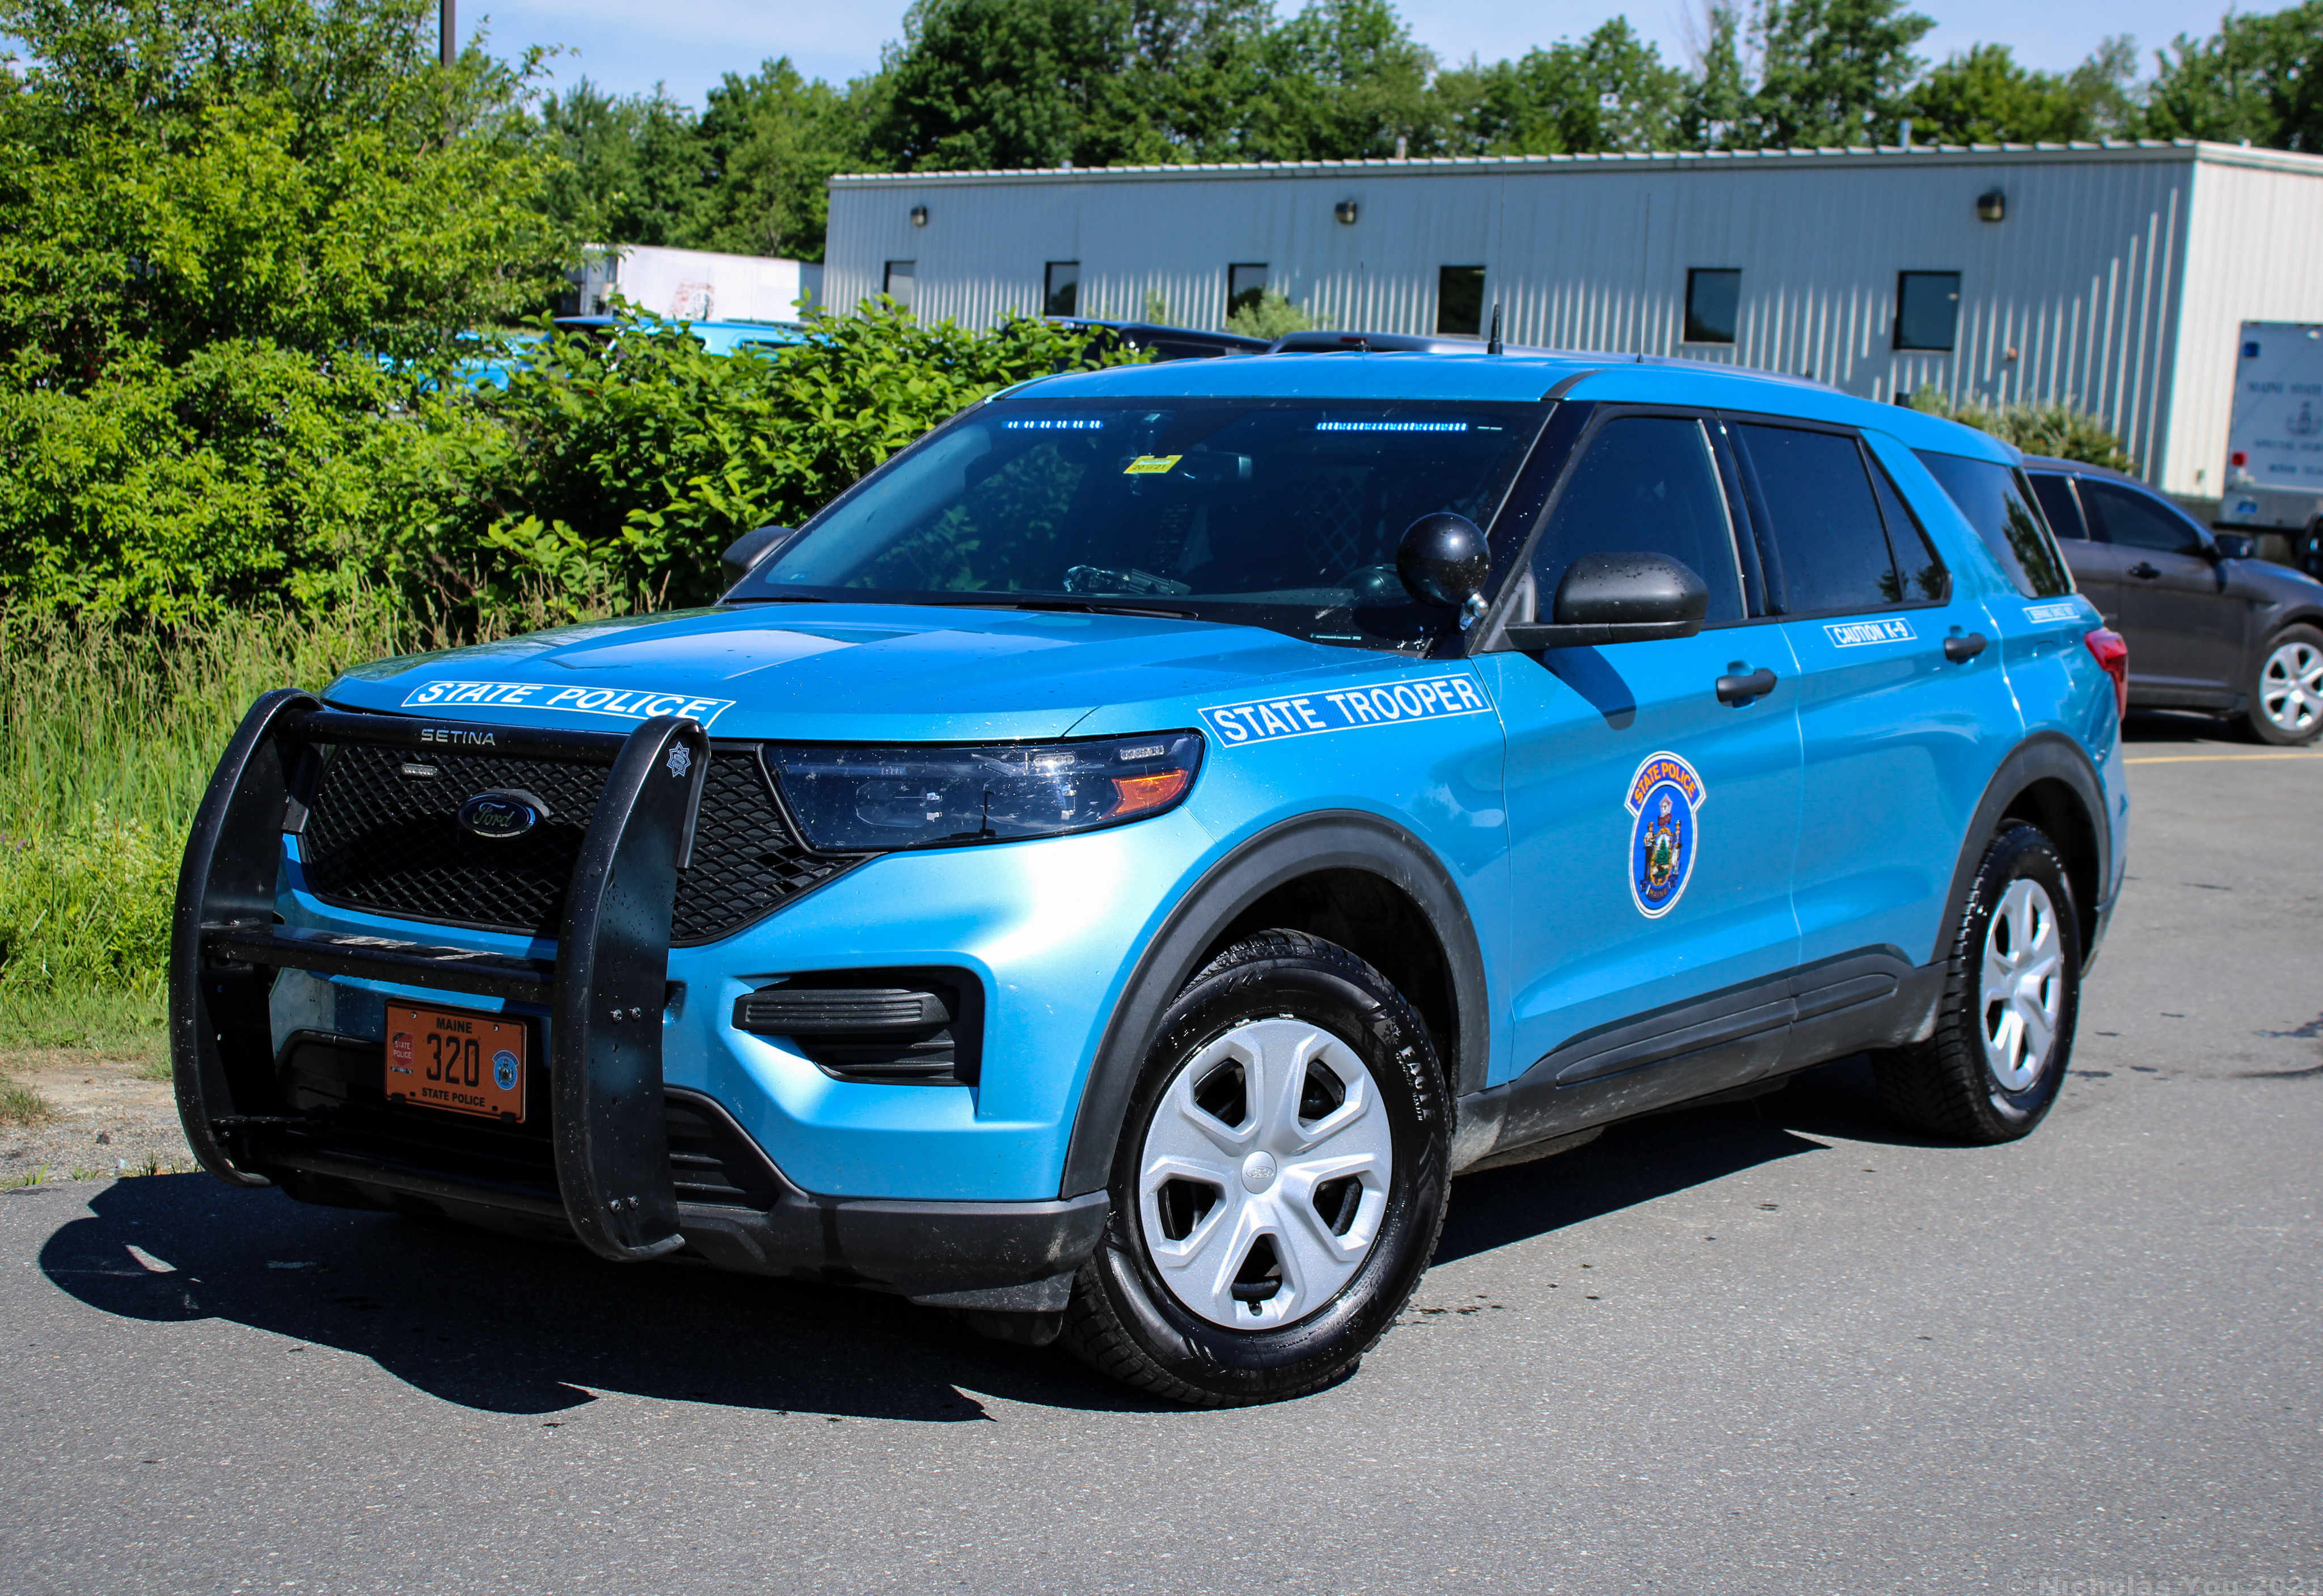 A photo  of Maine State Police
            Cruiser 320, a 2020-2021 Ford Police Interceptor Utility             taken by Nicholas You